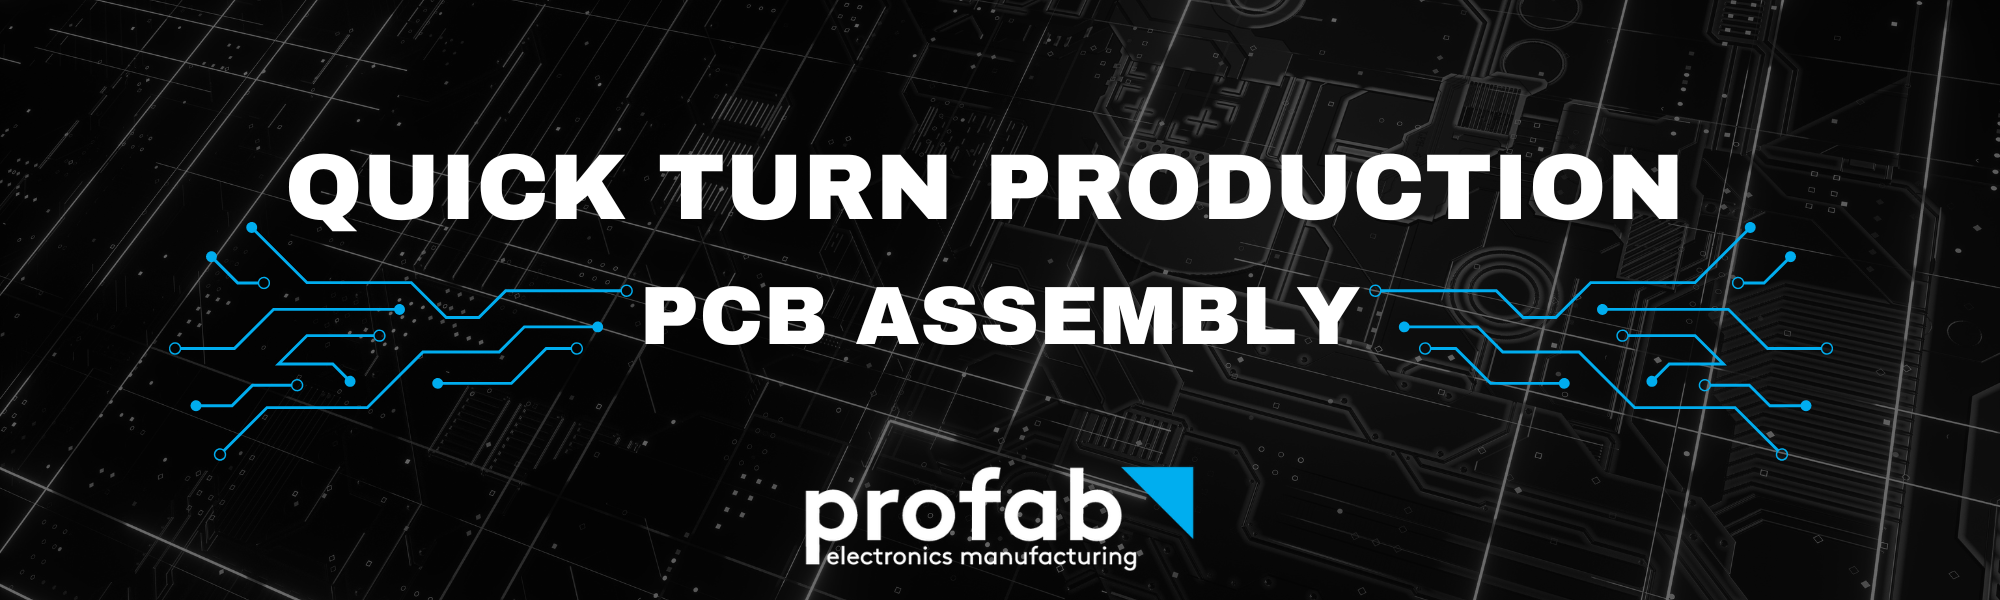 Quick Turn Production PCB Assembly